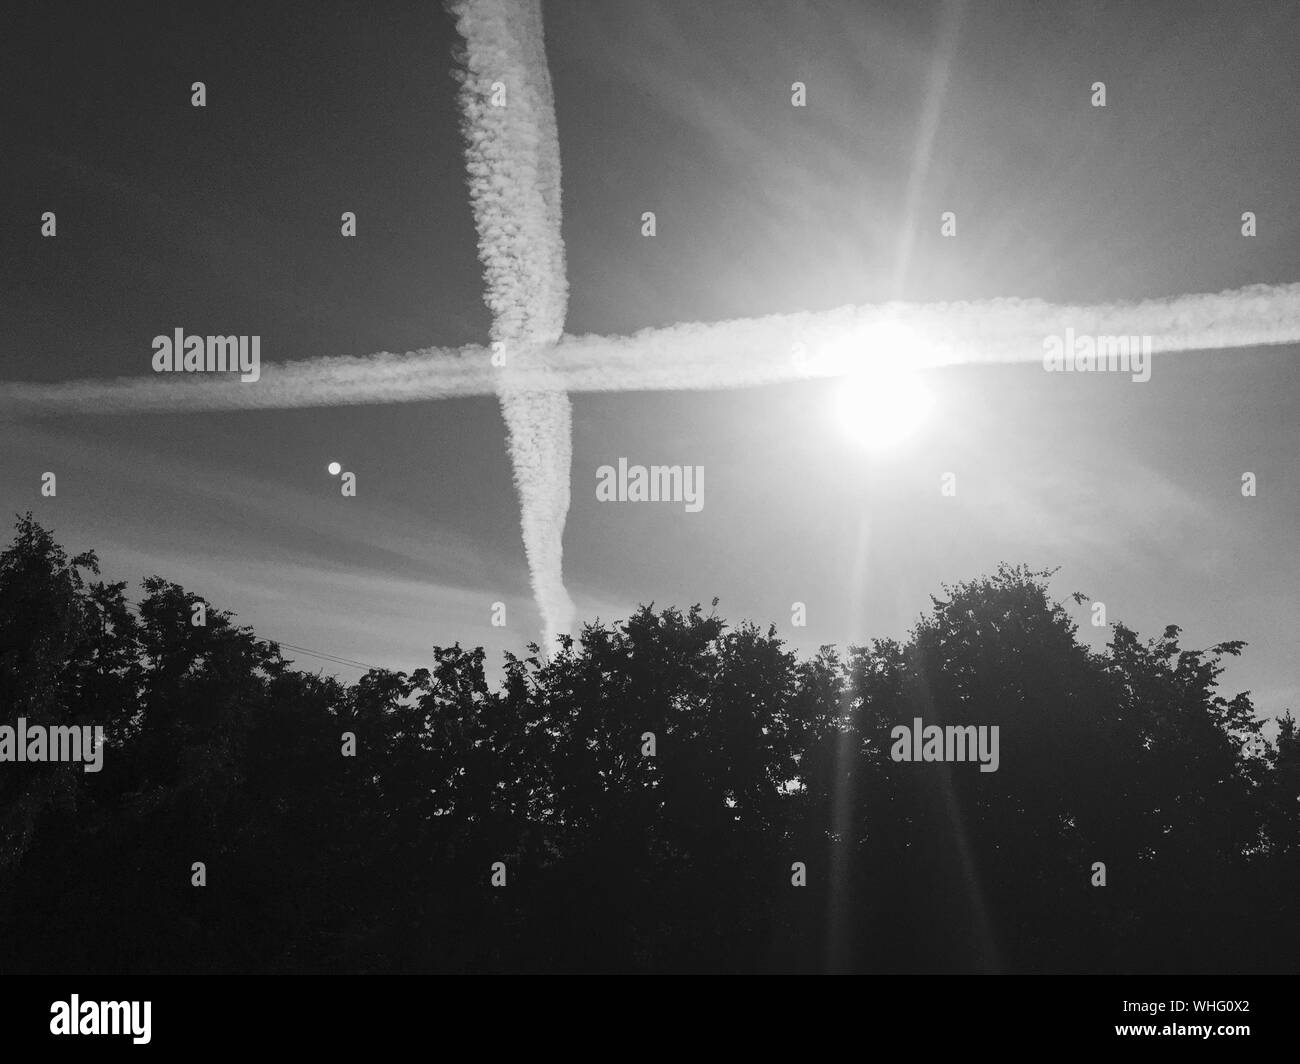 Low Angle View Of Vapor Trail And Sunlight Over Silhouette Trees Stock Photo